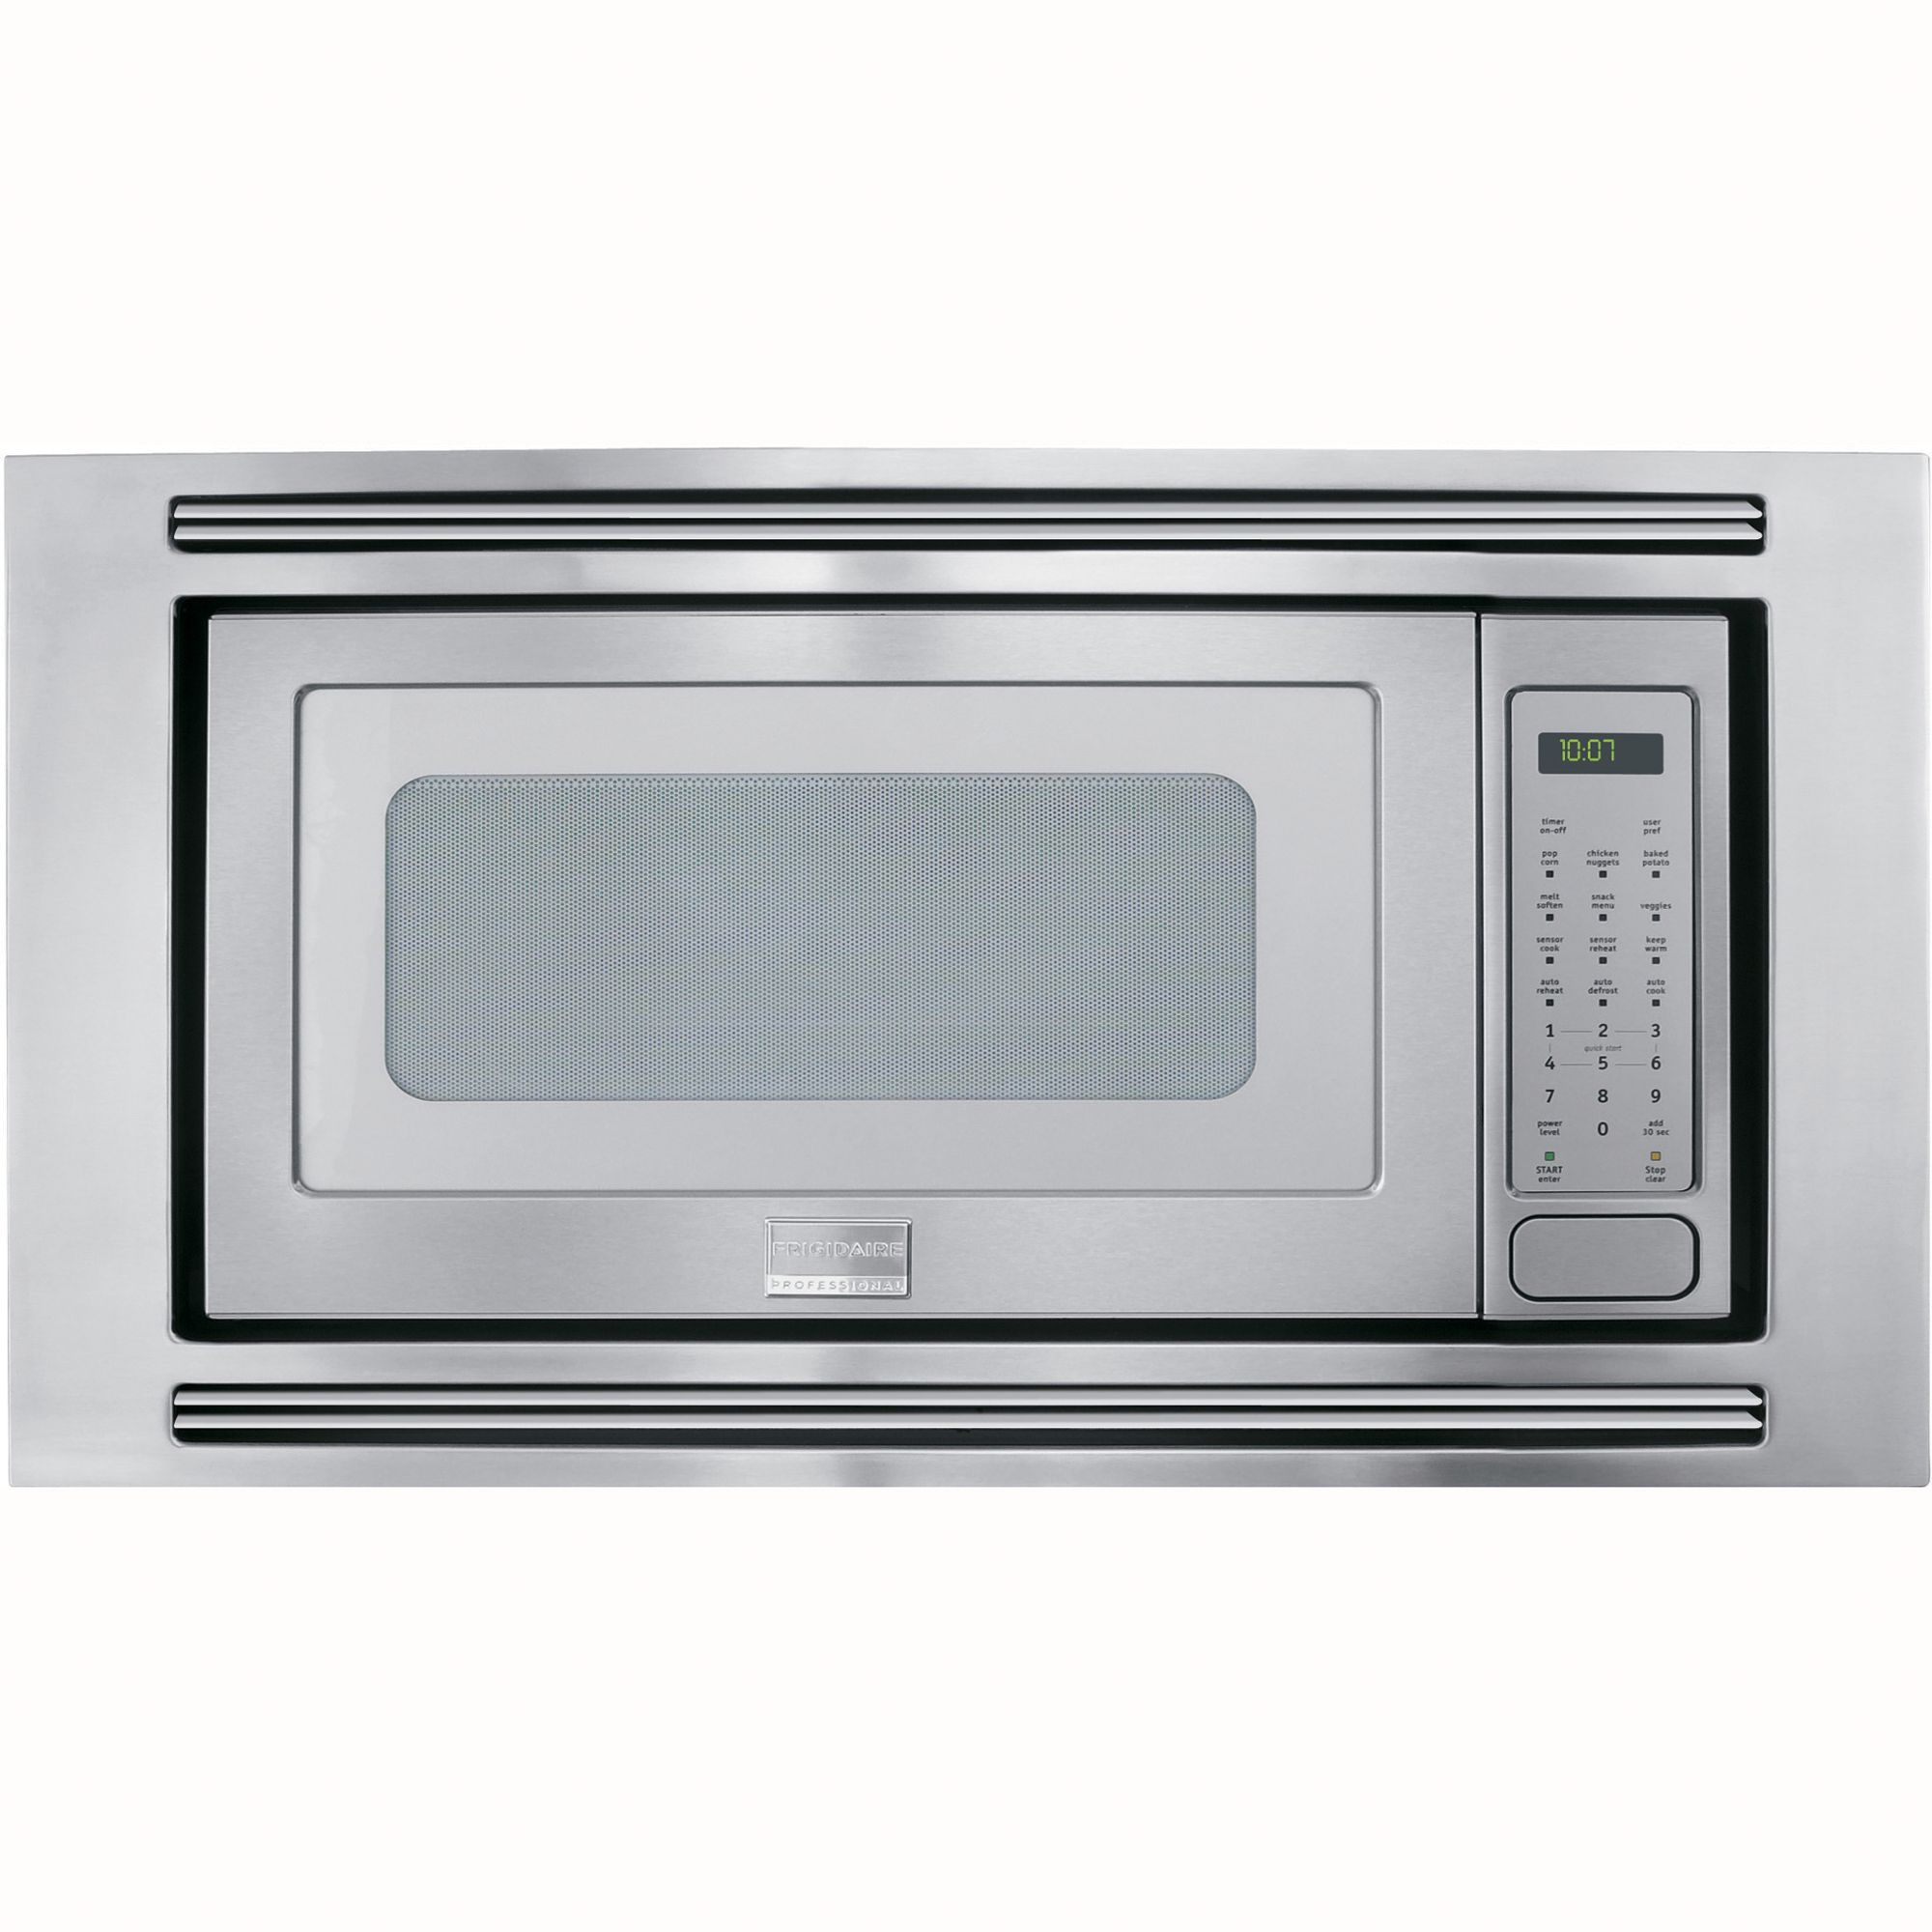 Frigidaire Professional Series 24 2.0 cu. ft. Built-In Microwave Oven